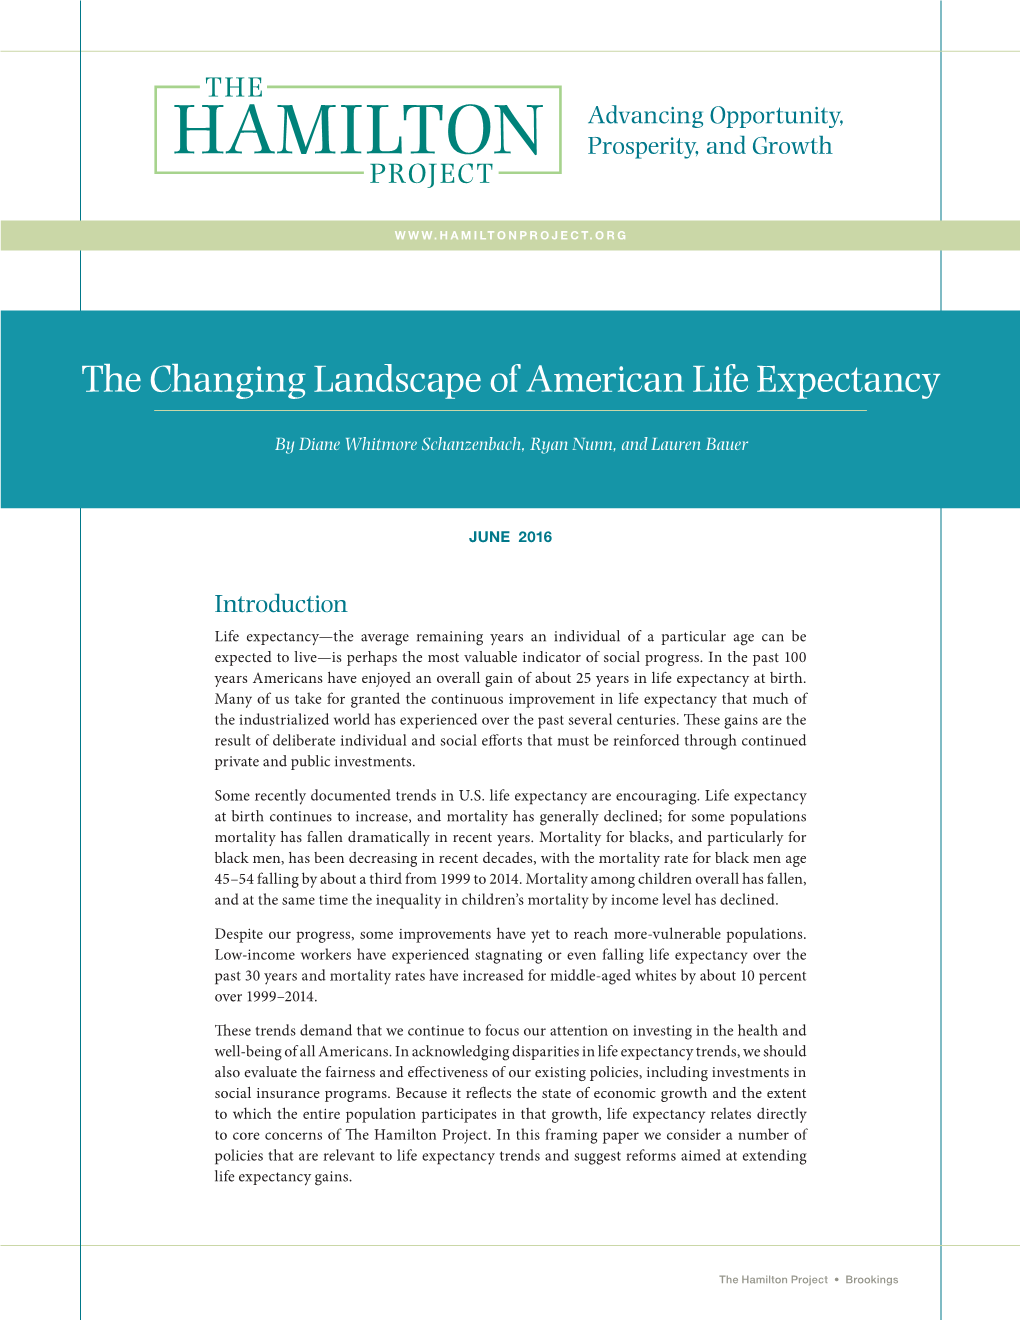 The Changing Landscape of American Life Expectancy